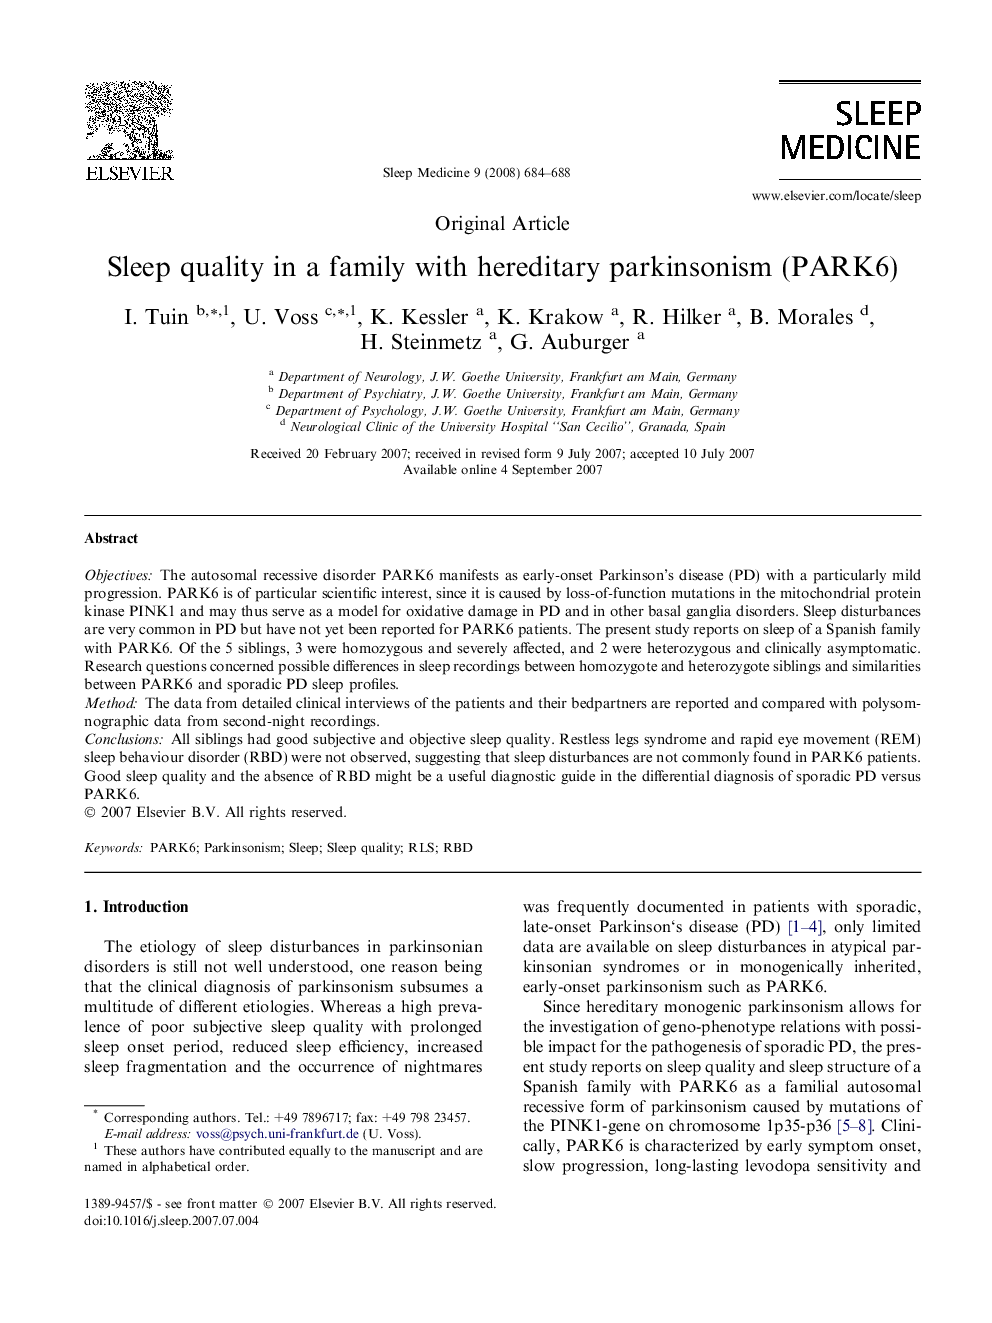 Sleep quality in a family with hereditary parkinsonism (PARK6)